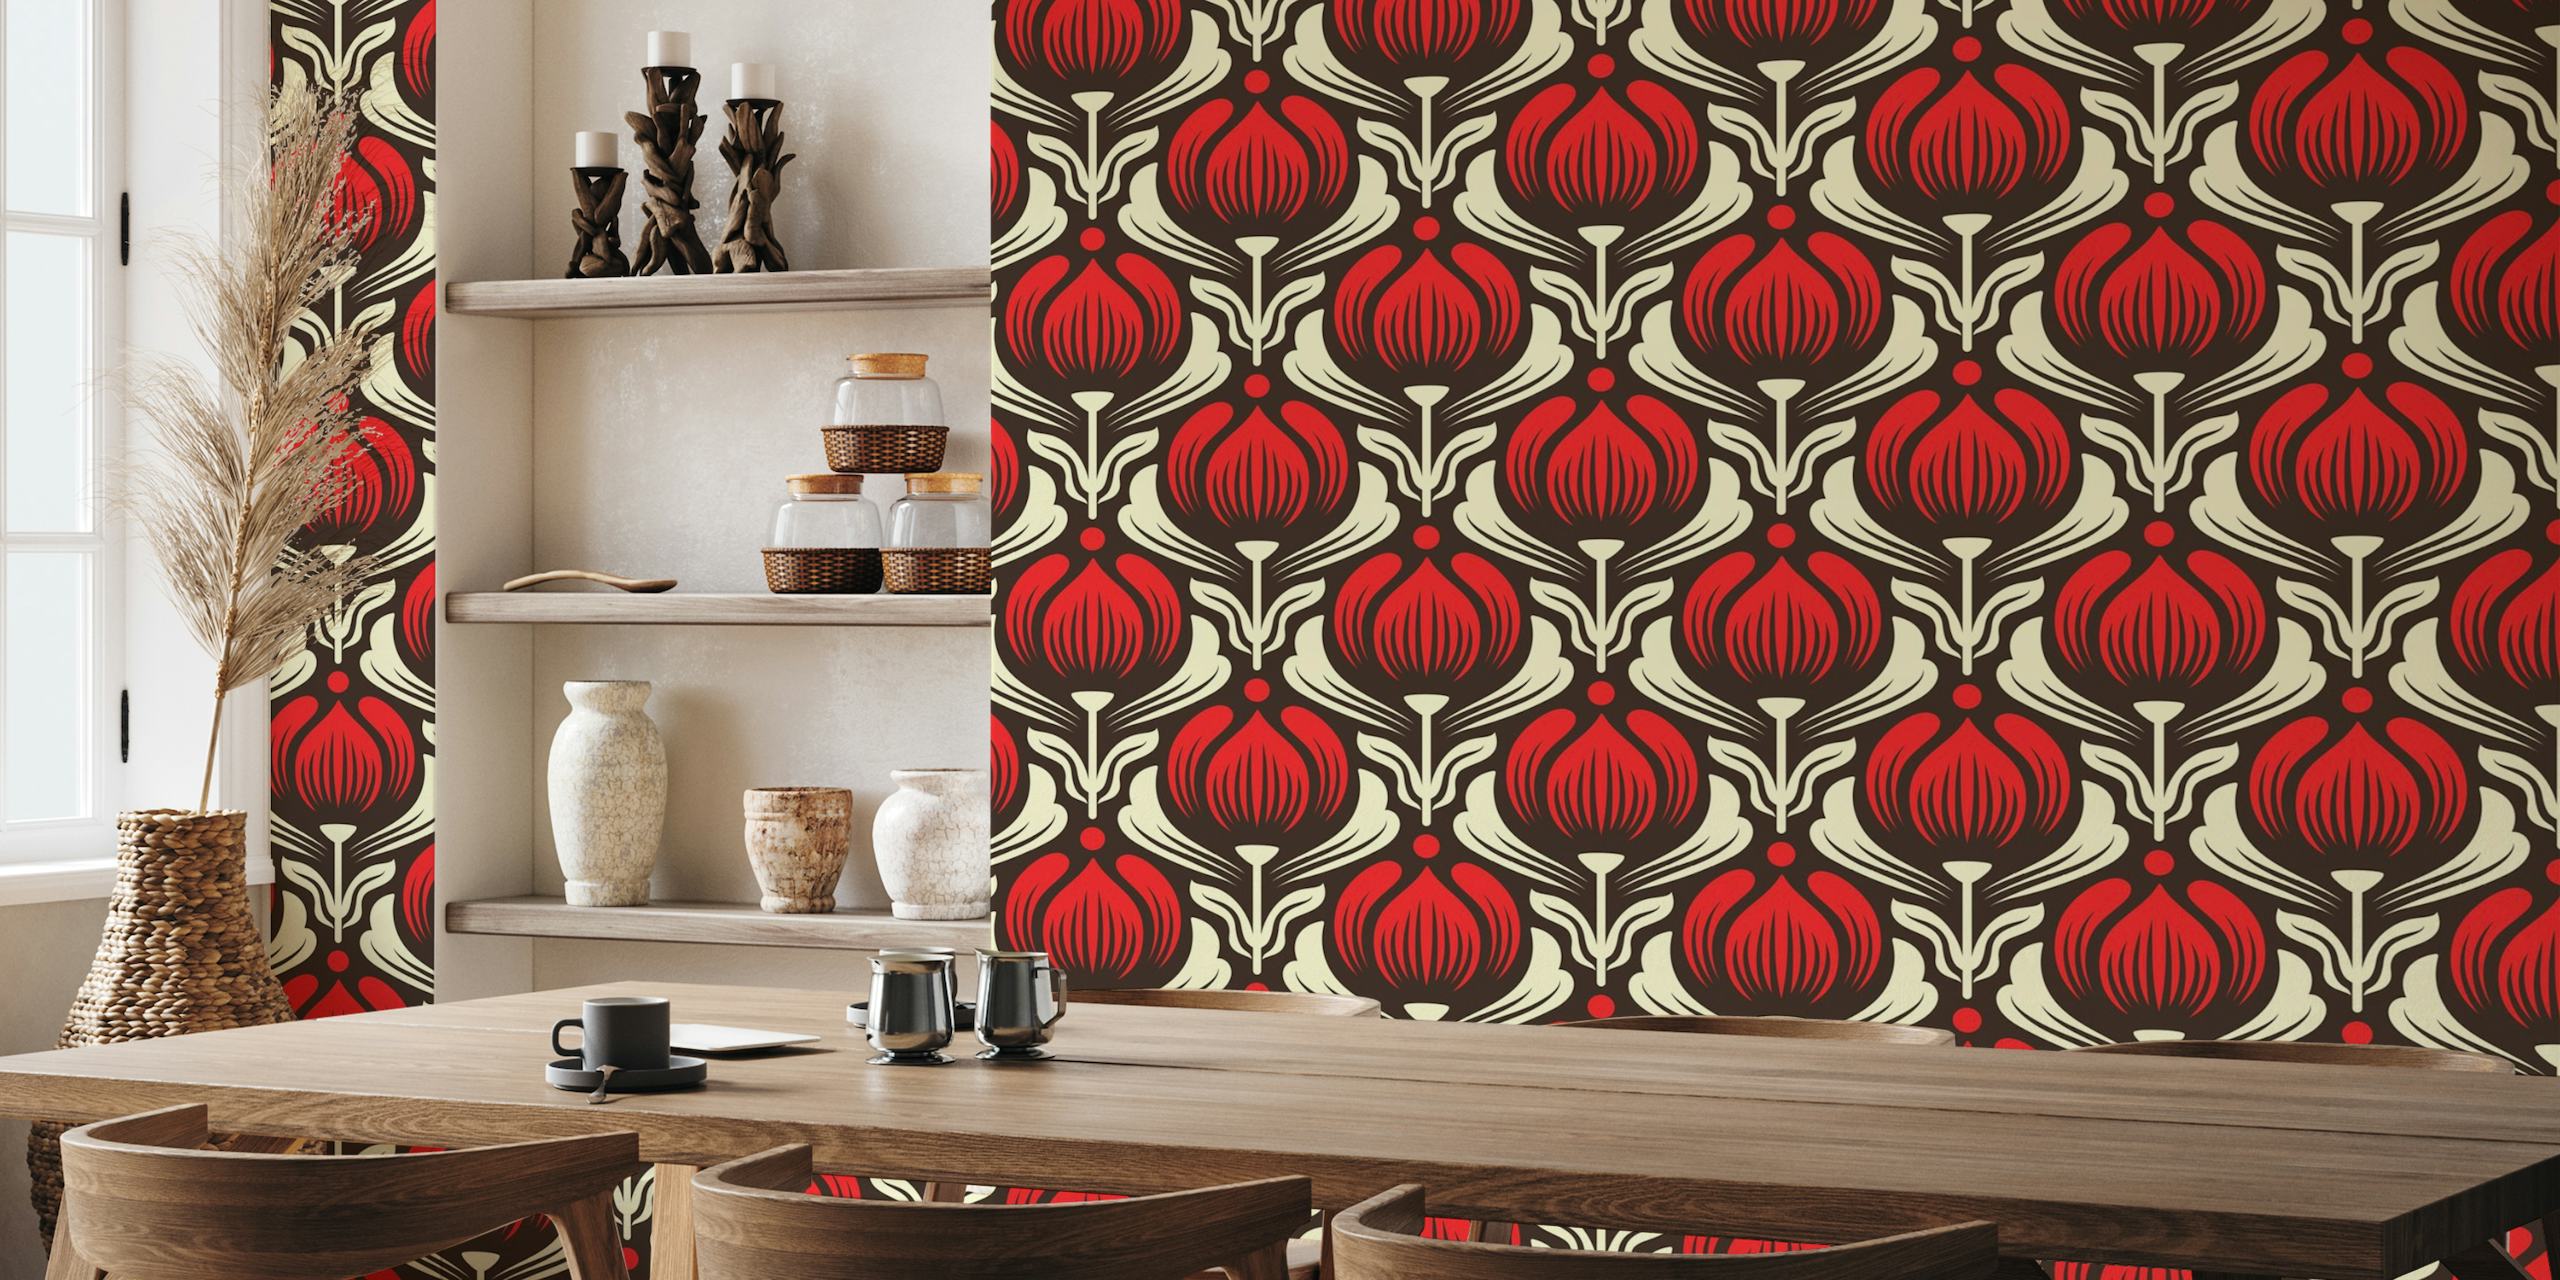 Vintage red flowers on a dark patterned background wall mural